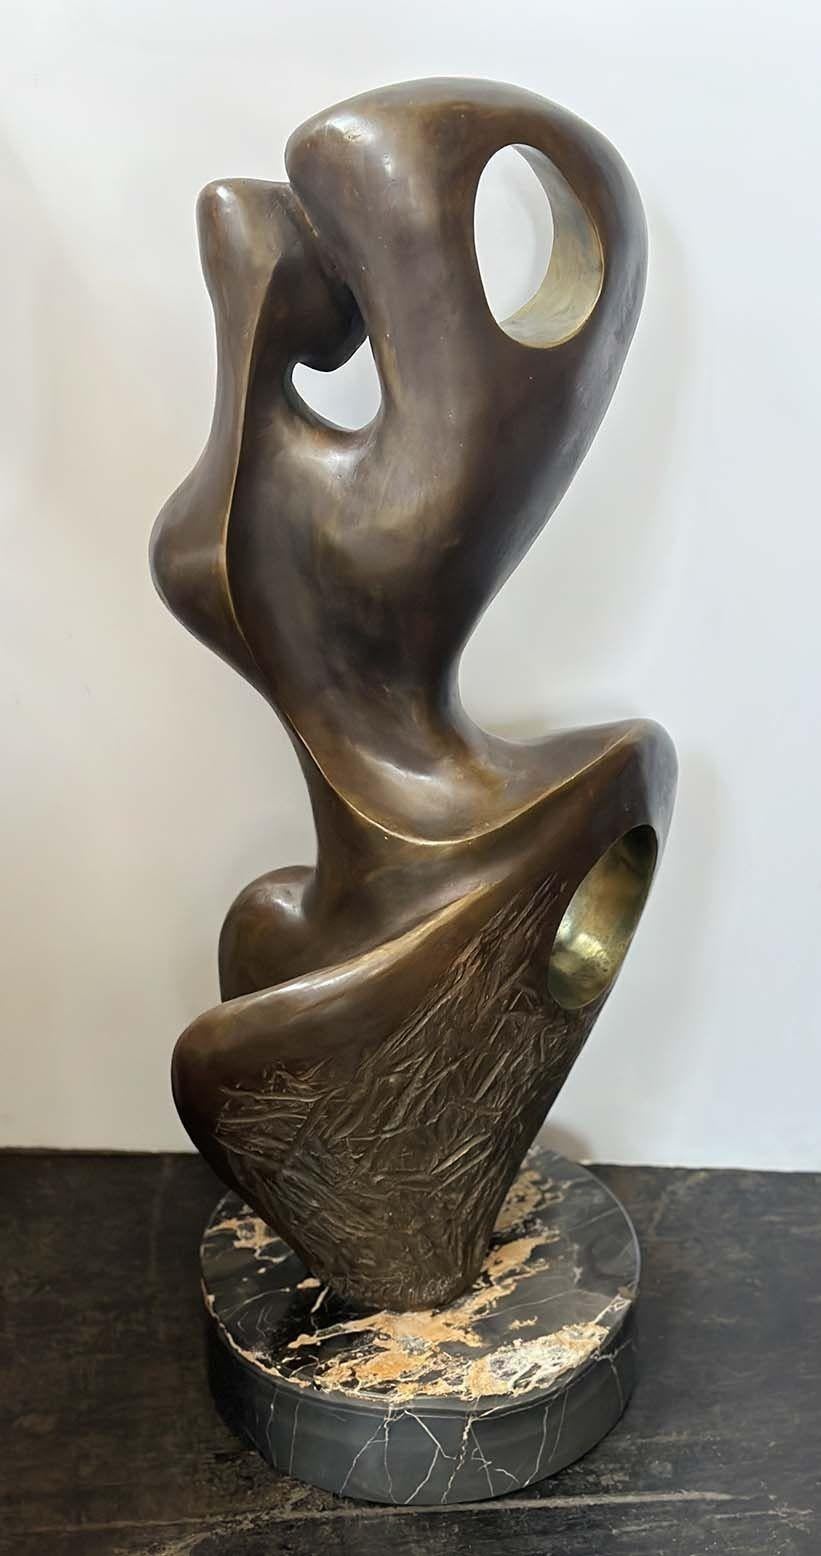 Vintage Swiss sculpture made with quality bronze depicting an abstract figure with great detail all around standing gracefully on a veined black round marble base.
*Signed and dated by Jean-Jacques Porret (1986).
*Numbered #2/5
Dimensions:
28